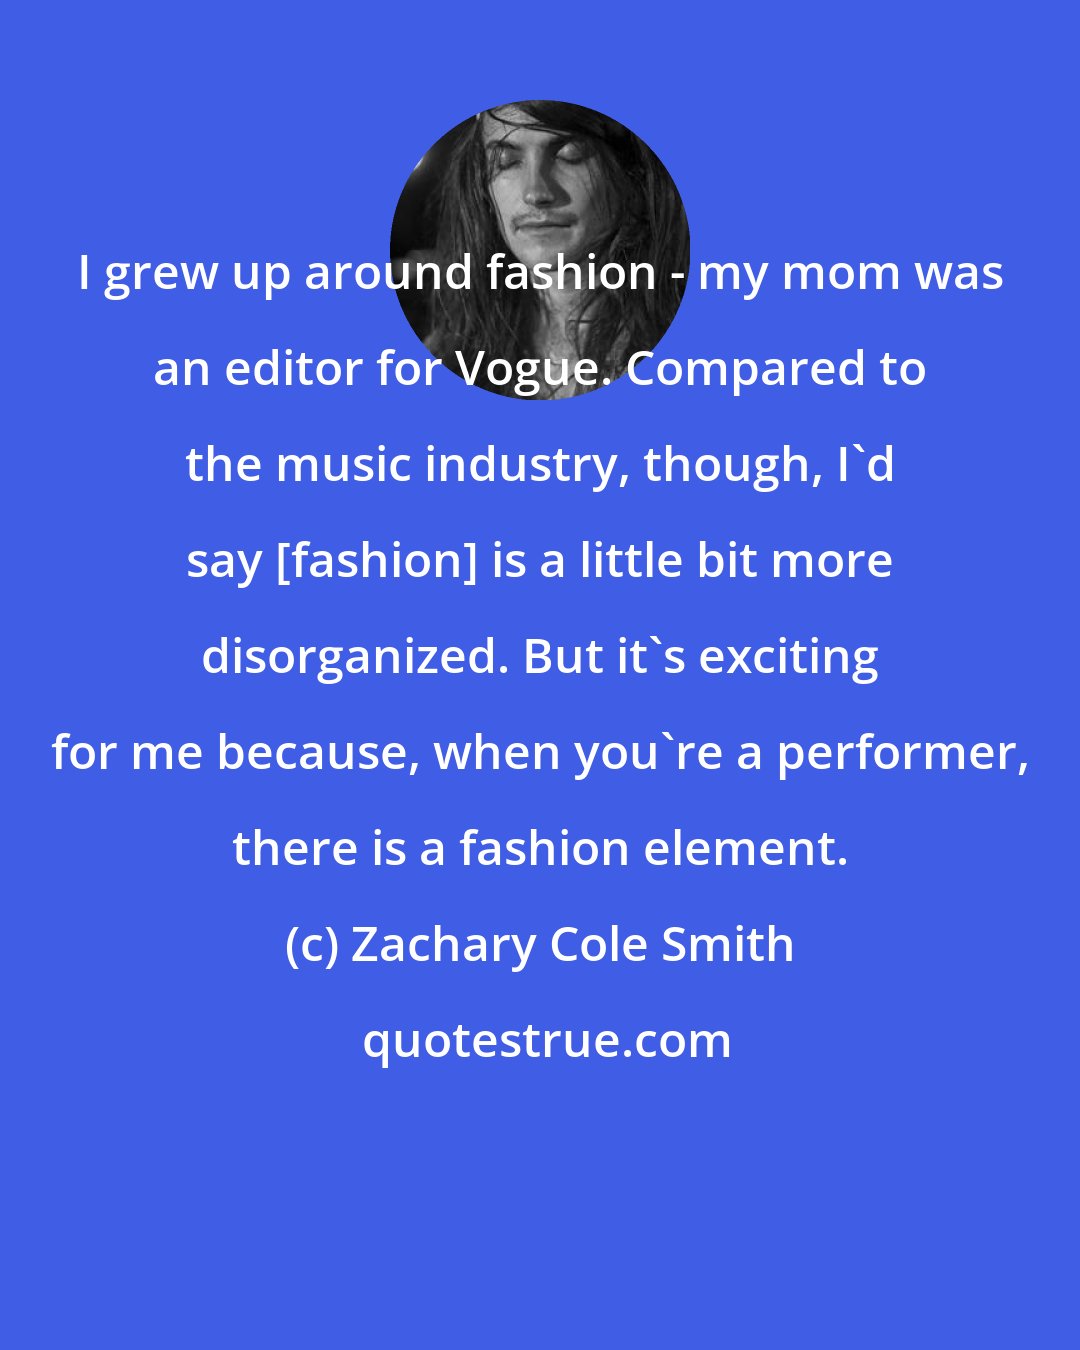 Zachary Cole Smith: I grew up around fashion - my mom was an editor for Vogue. Compared to the music industry, though, I'd say [fashion] is a little bit more disorganized. But it's exciting for me because, when you're a performer, there is a fashion element.